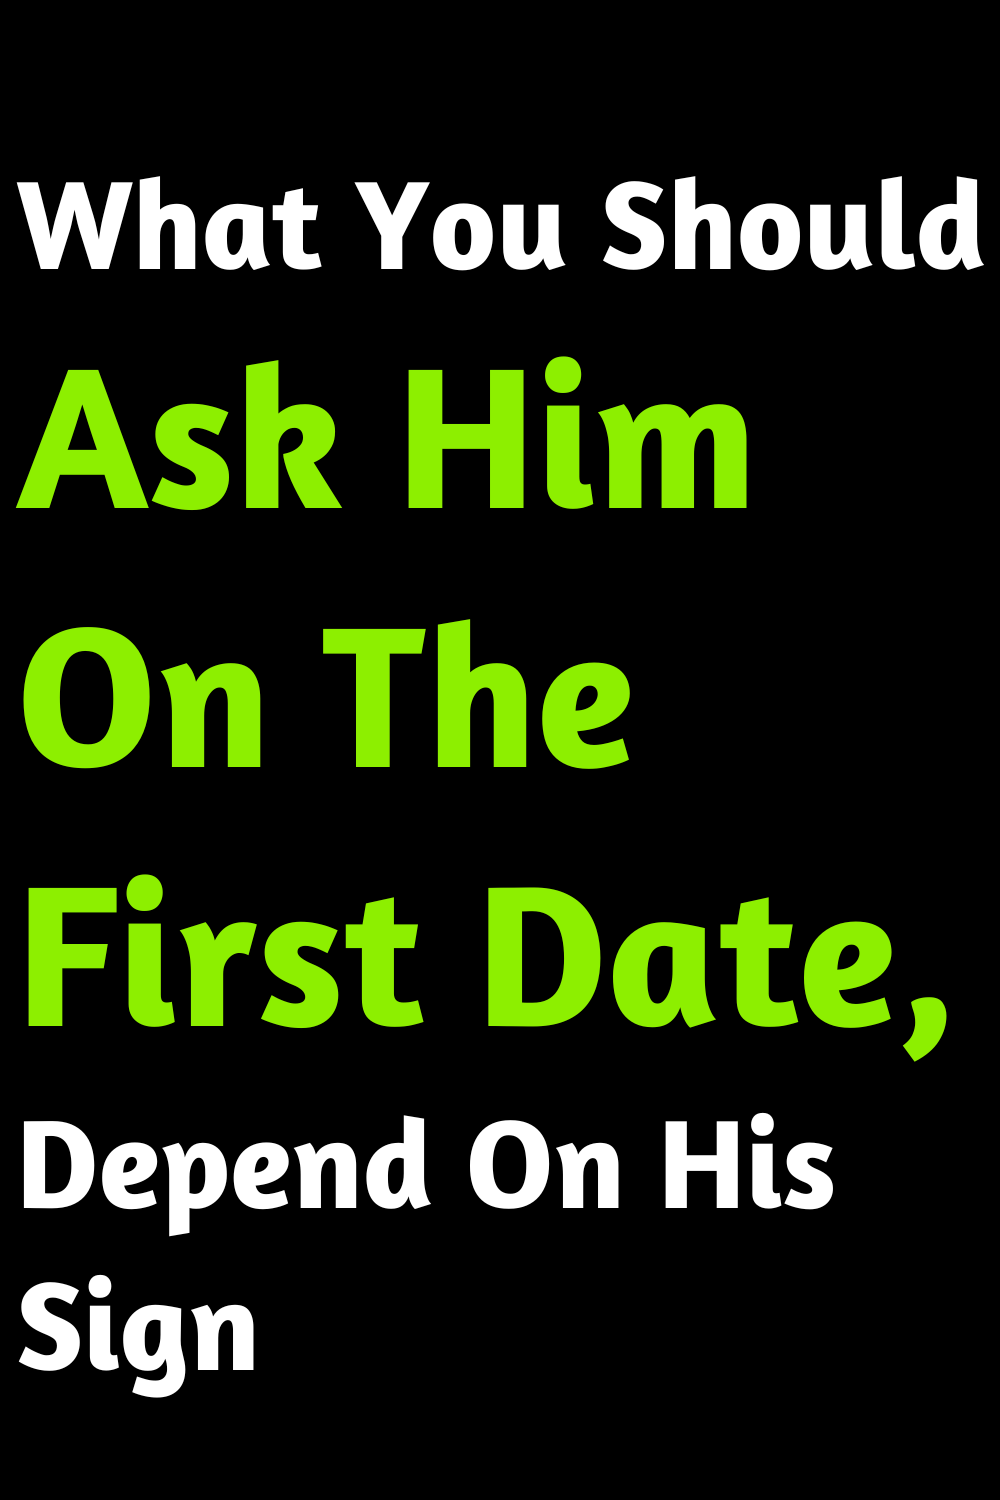 What You Should Ask Him On The First Date, Depend On His Sign